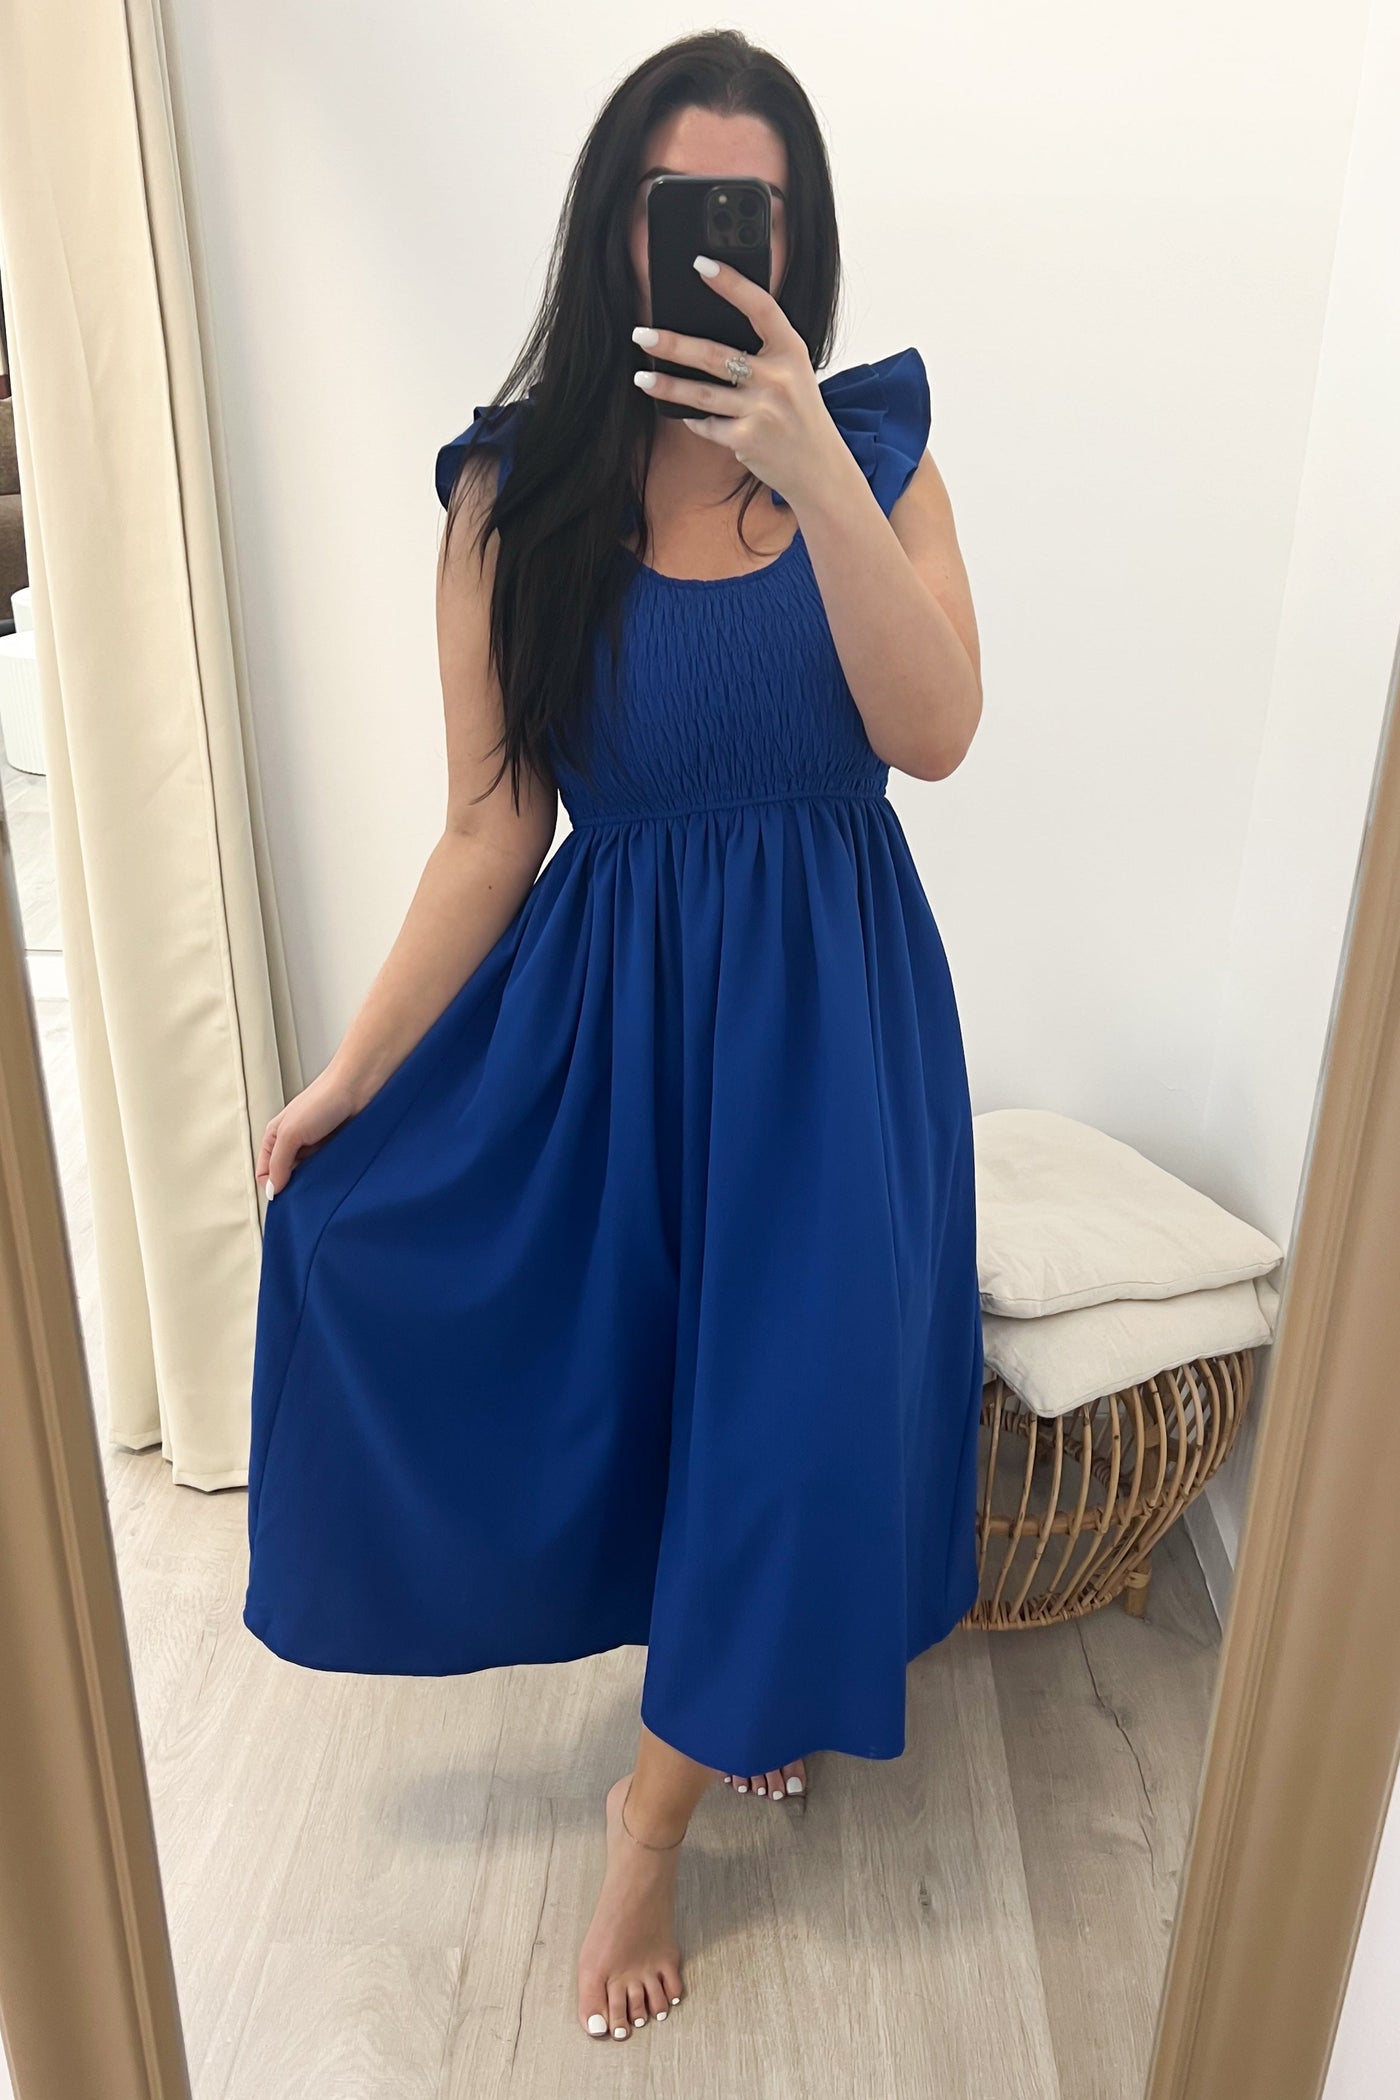 "Give Grace" Dress (Royal Blue) - Happily Ever Aften